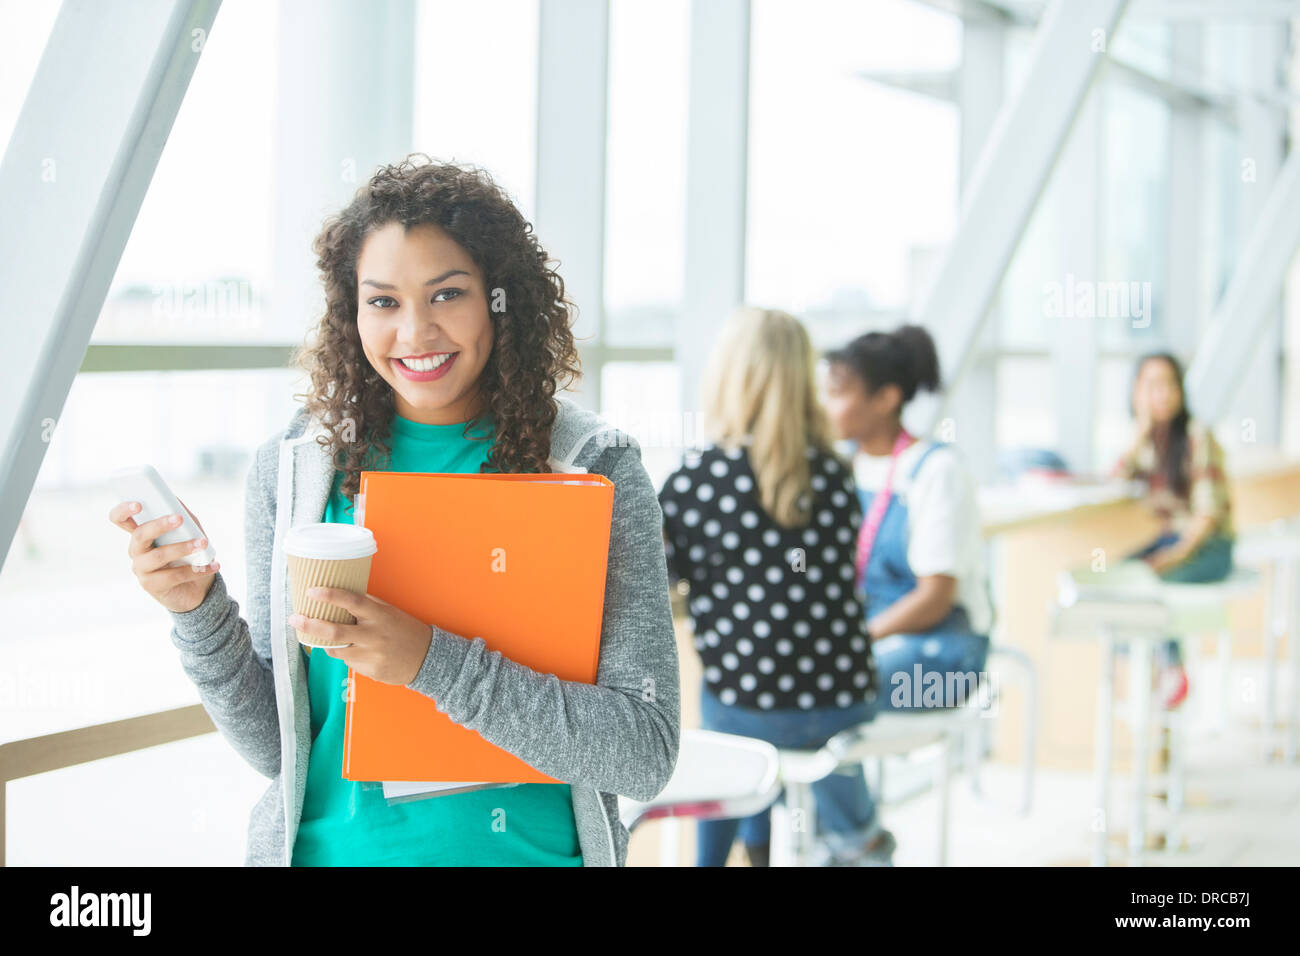 University student smiling in cafe Stock Photo